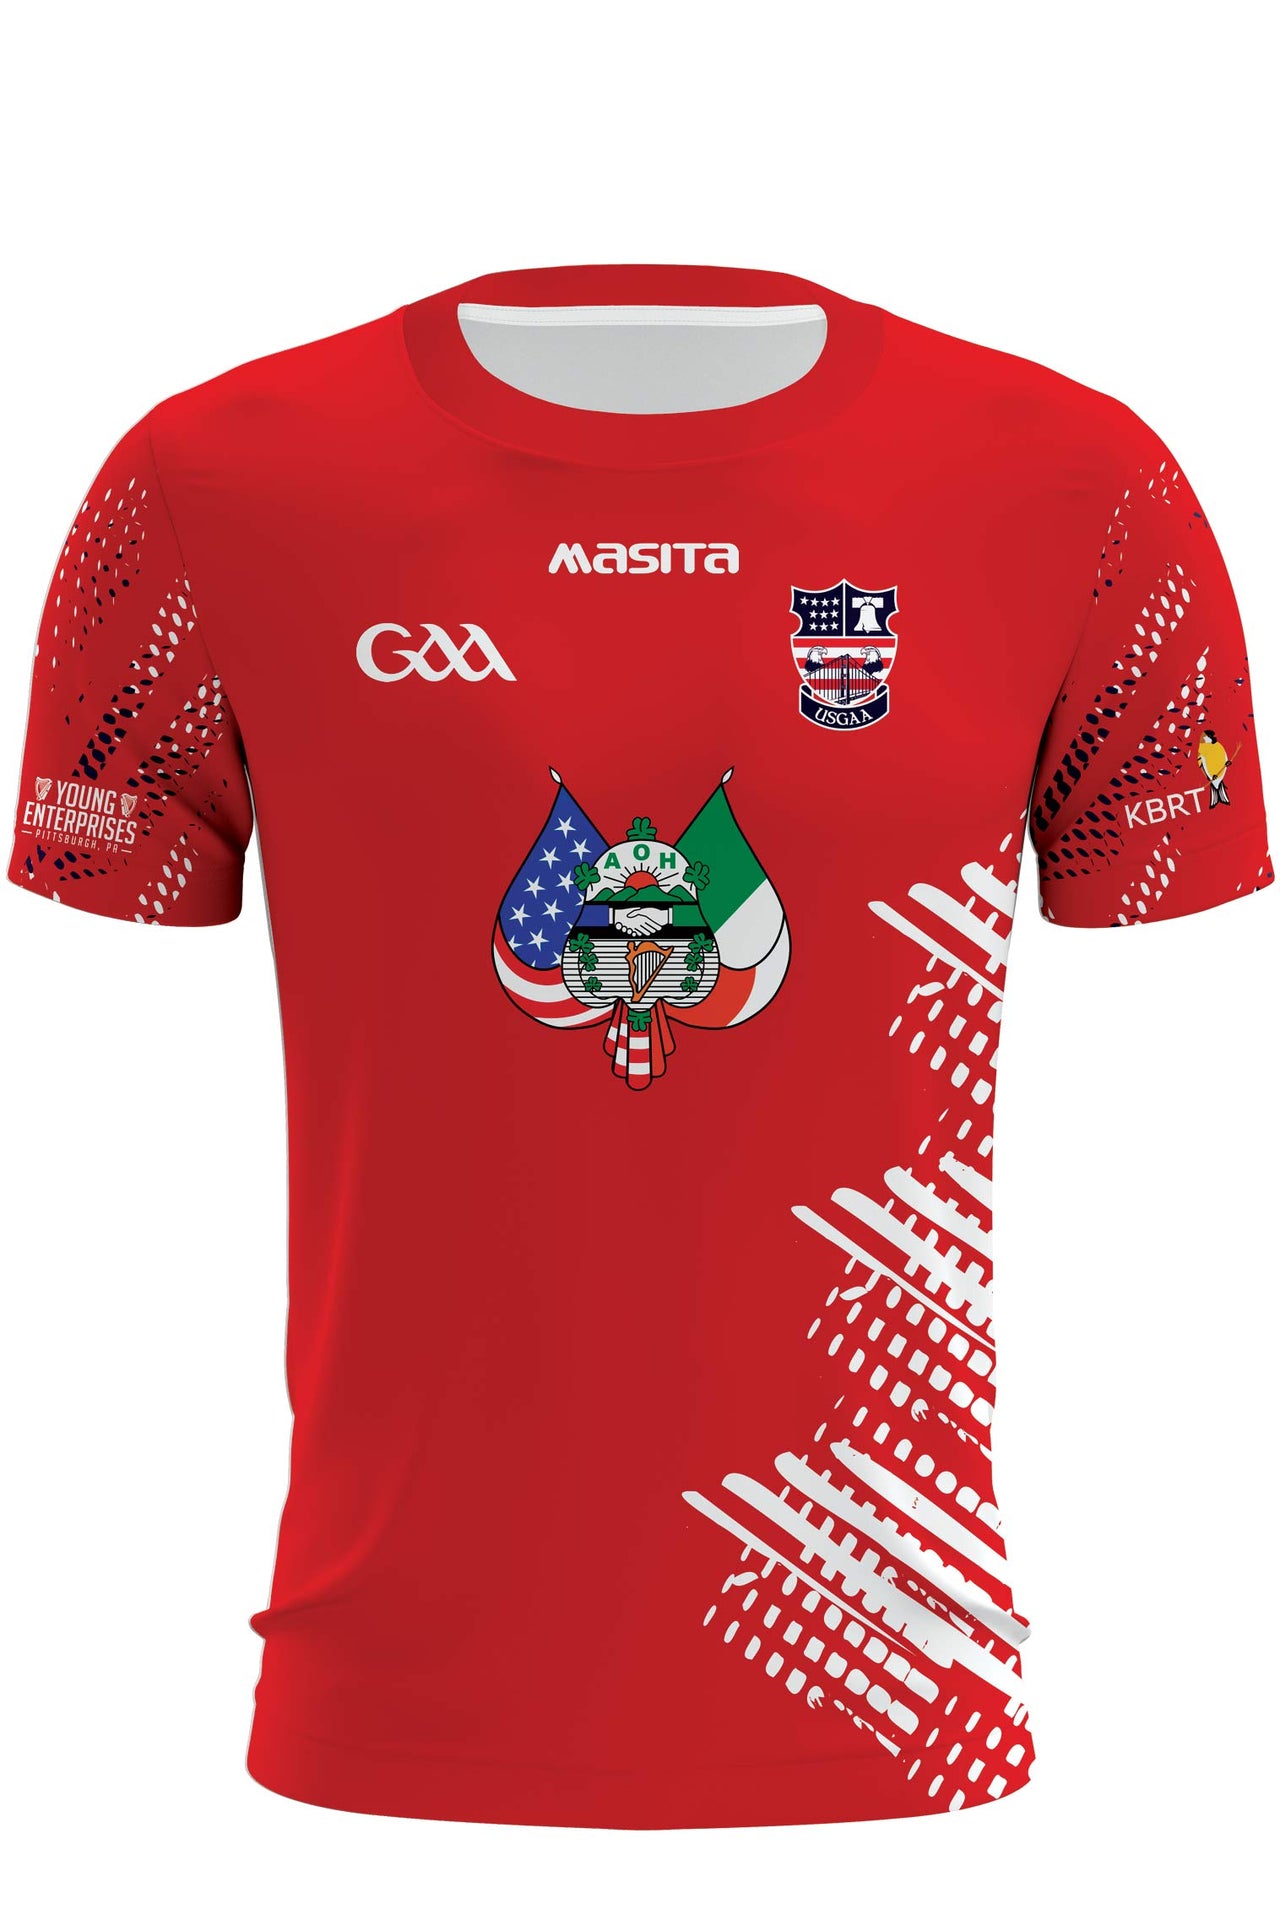 USGAA County Red Training Jersey Regular Fit Adult